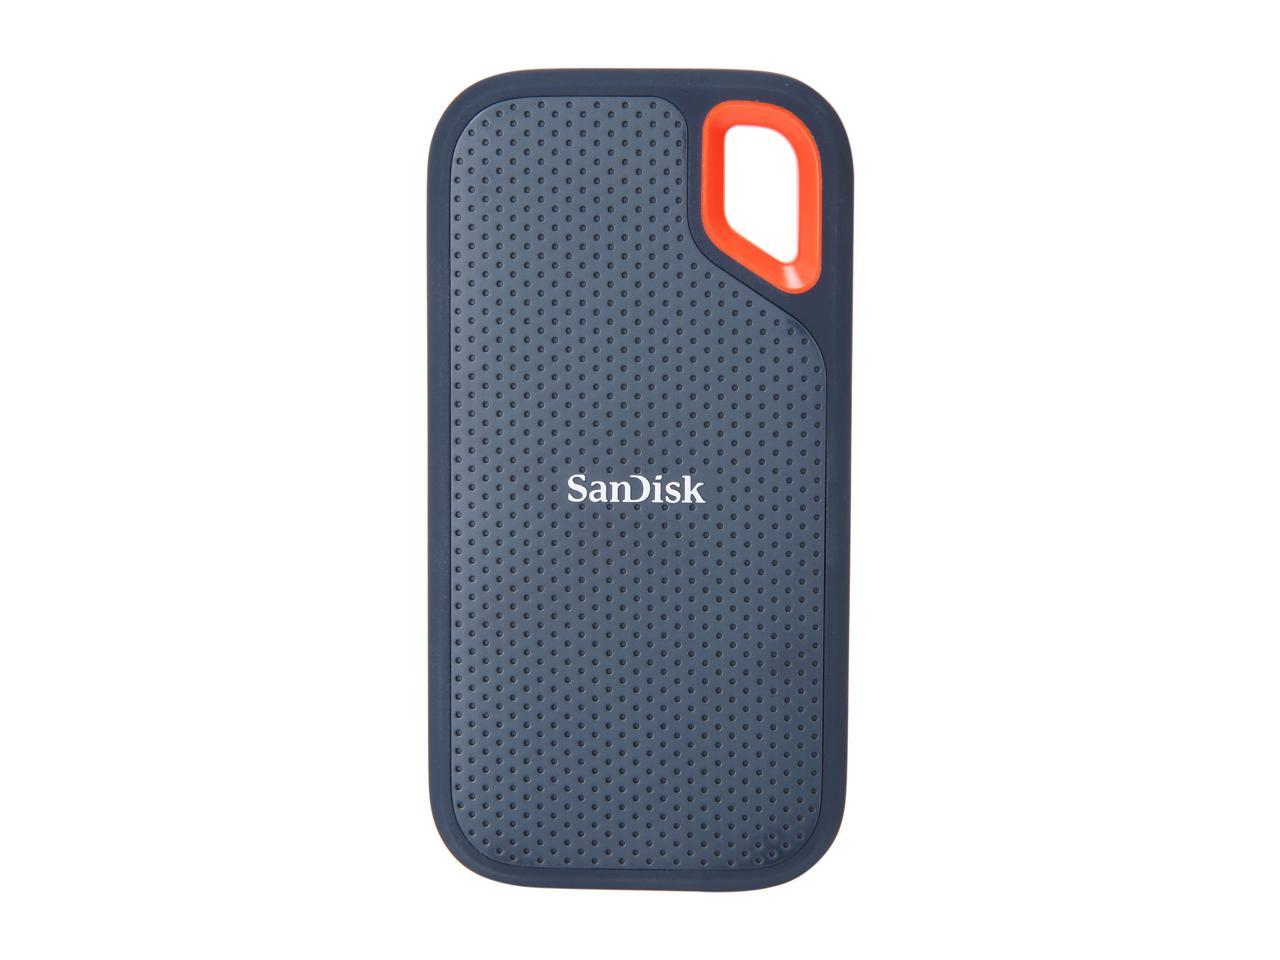 SanDisk 2TB Extreme Portable External SSD - Up to 550 MB/s - USB-C, USB 3.1  - SDSSDE60-2T00-G25